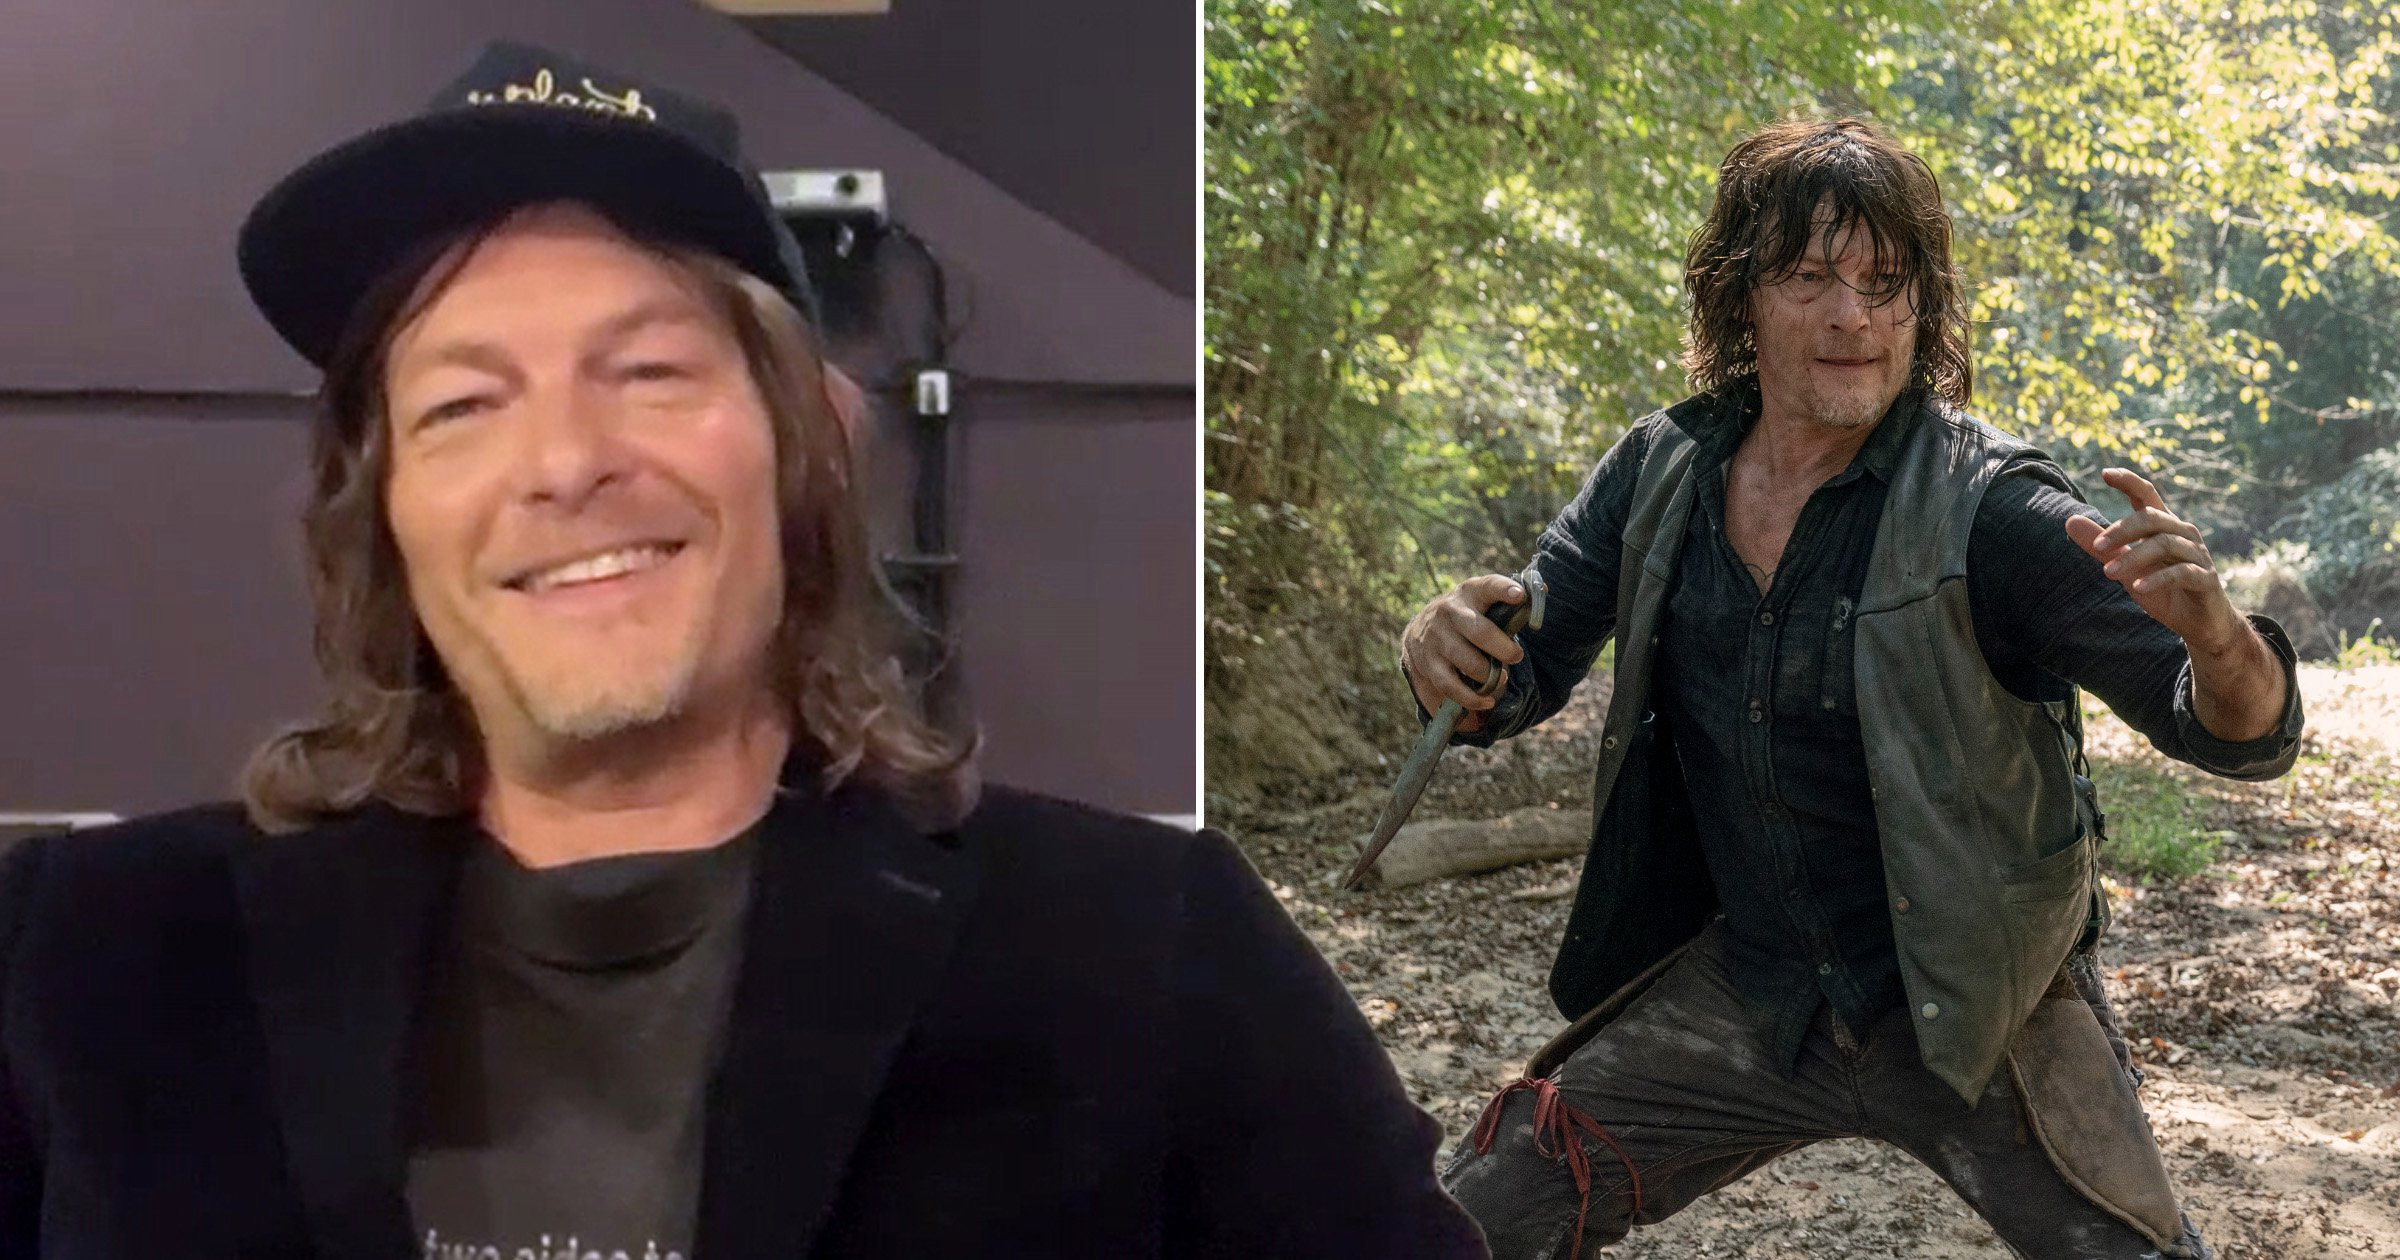 The Walking Dead’s Norman Reedus wants Daryl and Carol spin-off to offer hope to fans